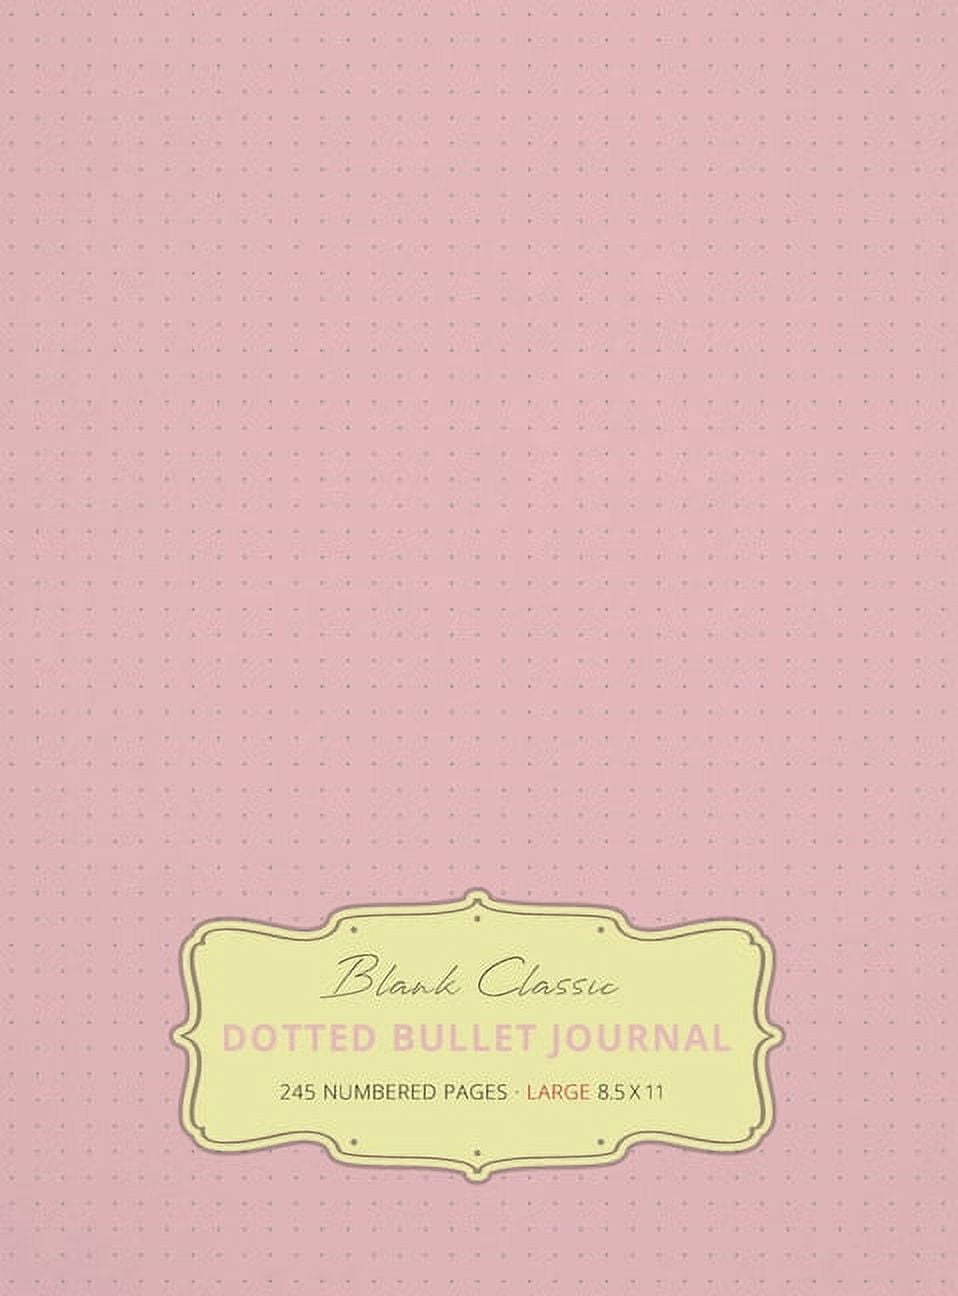 Large 8.5 X 11 Dotted Bullet Journal (Light Pink #18) Hardcover - 245 Numbered Pages